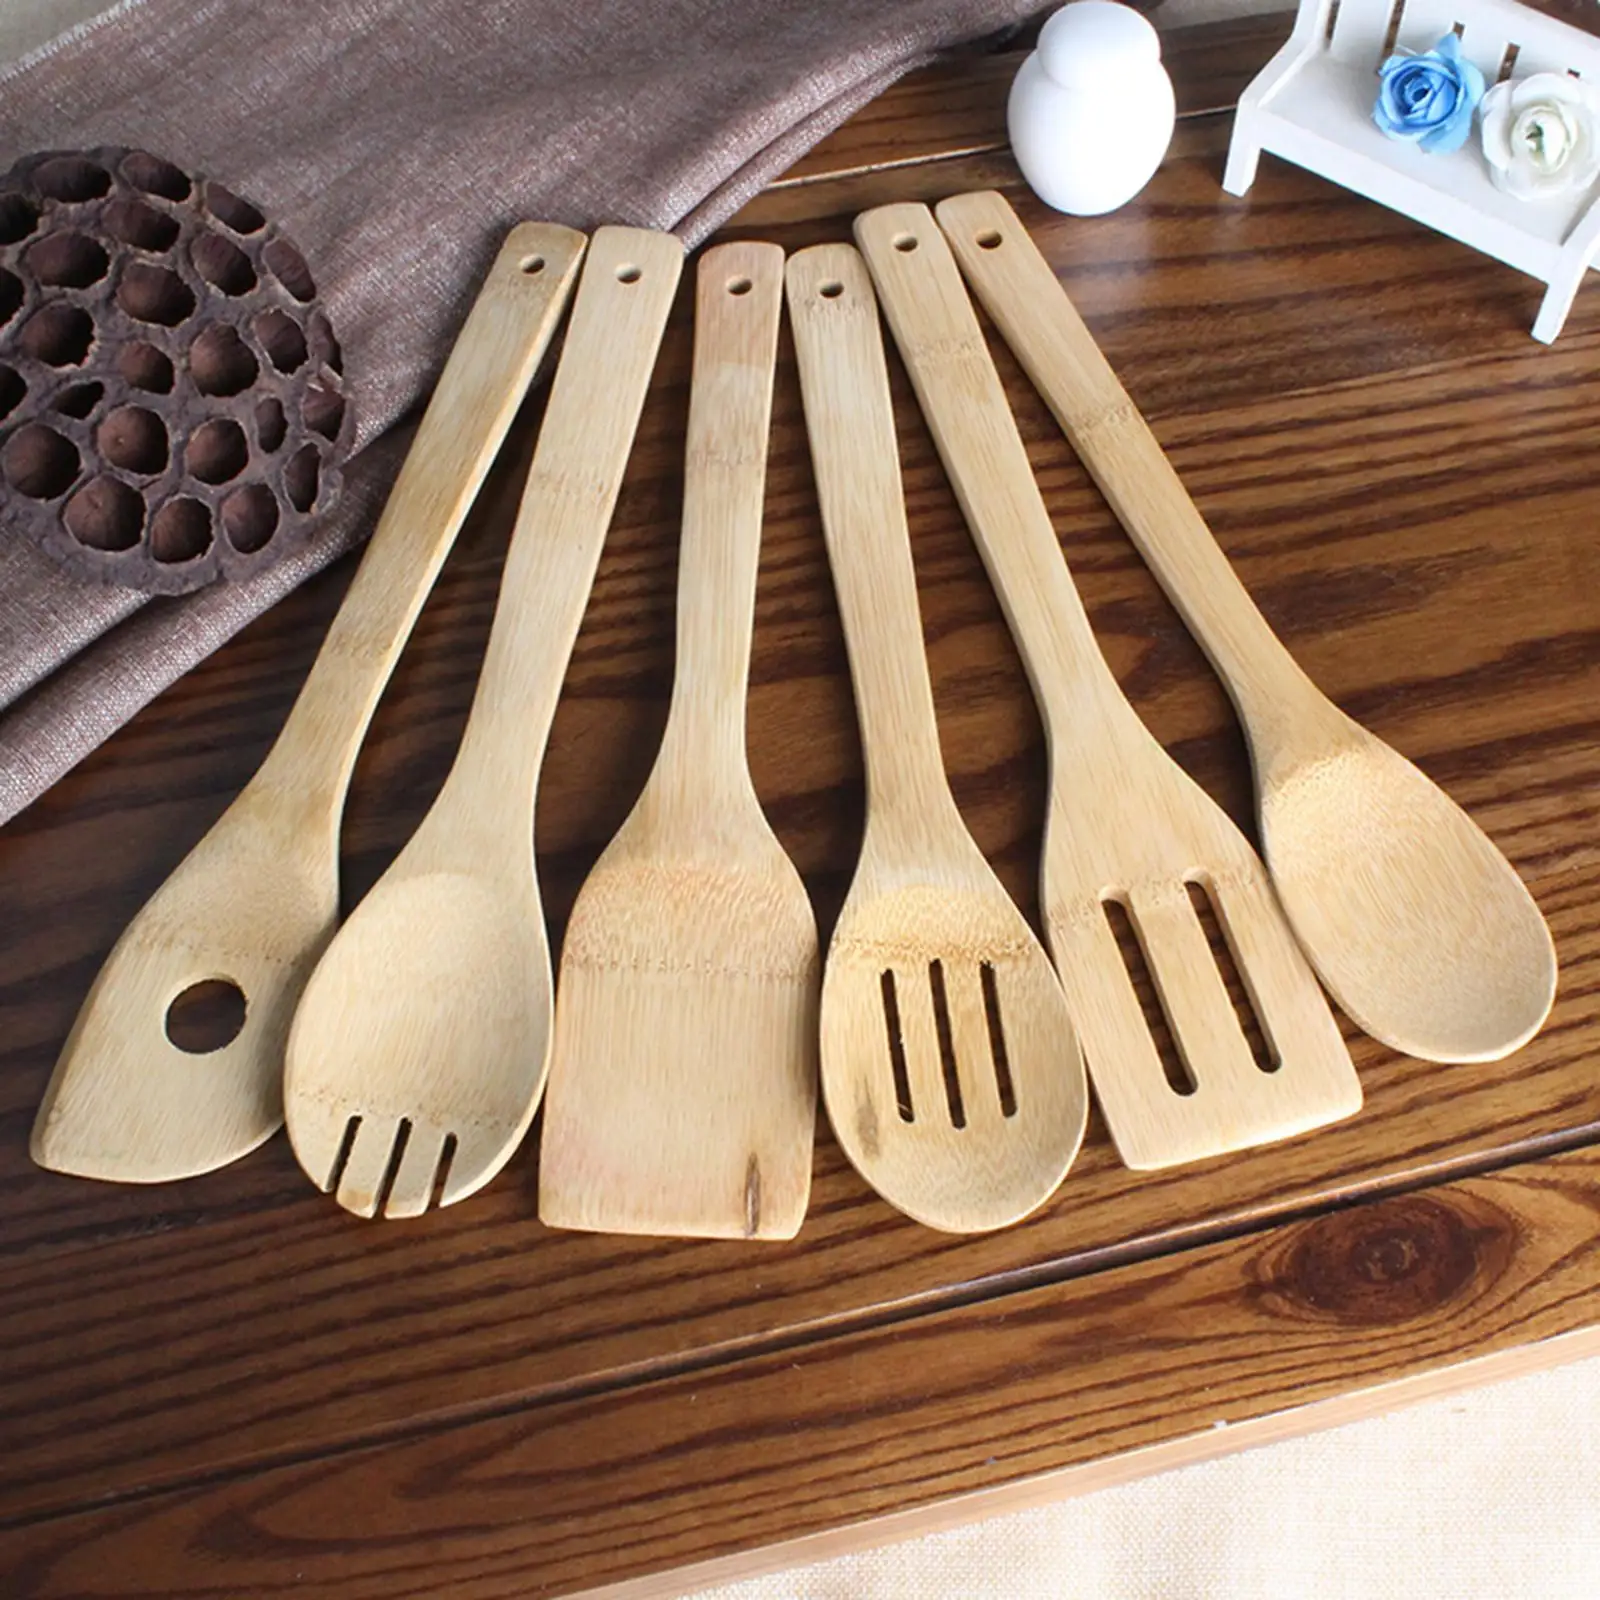 Wooden Spoons Durable Non Scratch Wooden Utensils for Kitchen Nonstick Cookware Stirring